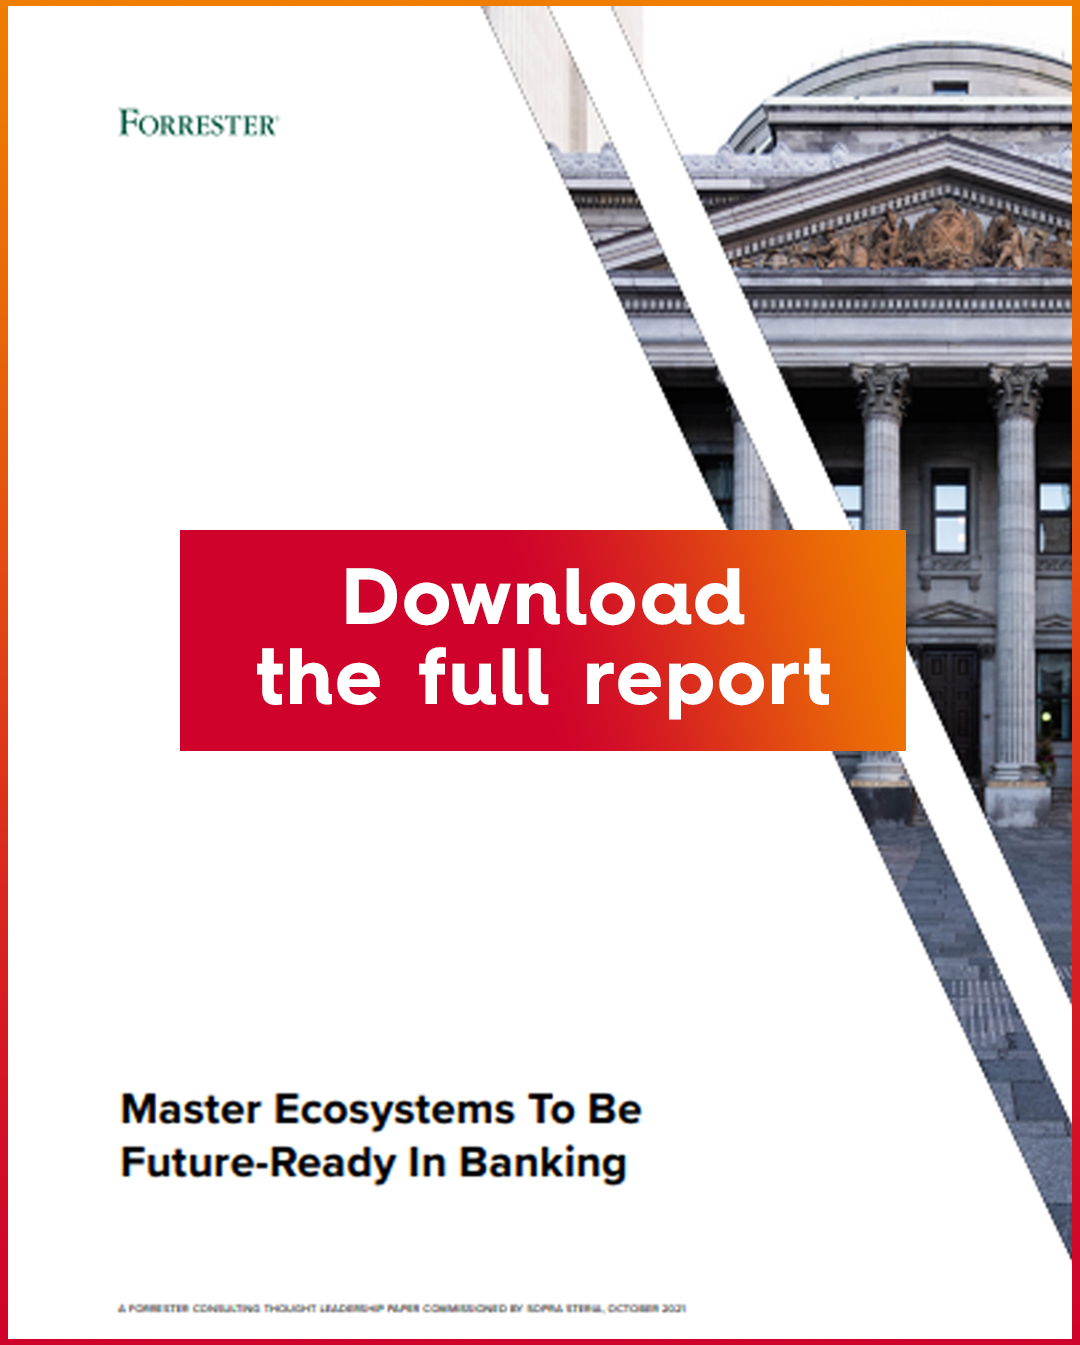 Download the report